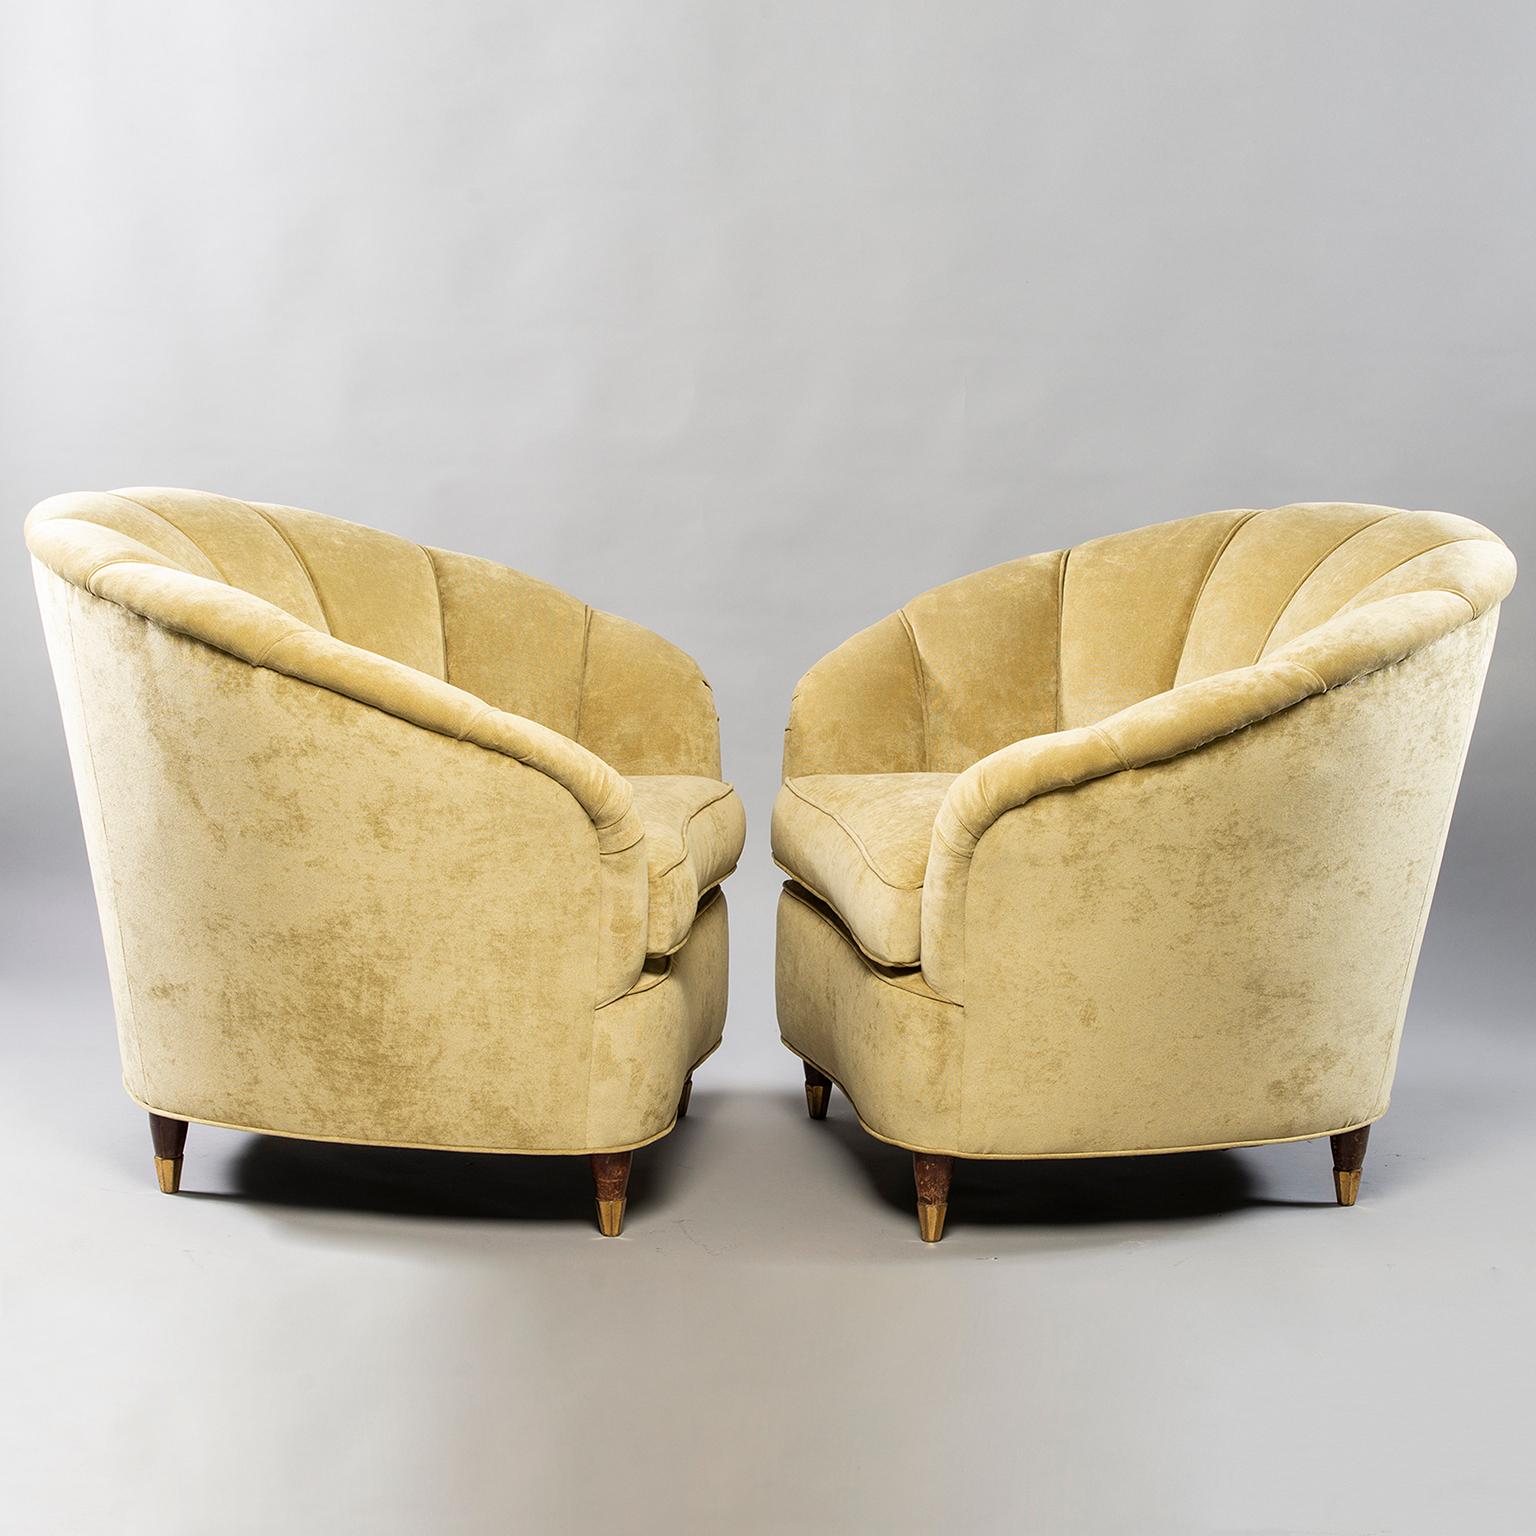 20th Century Coquille Form Sofa and Pair of Chairs Attributed to Paolo Buffa